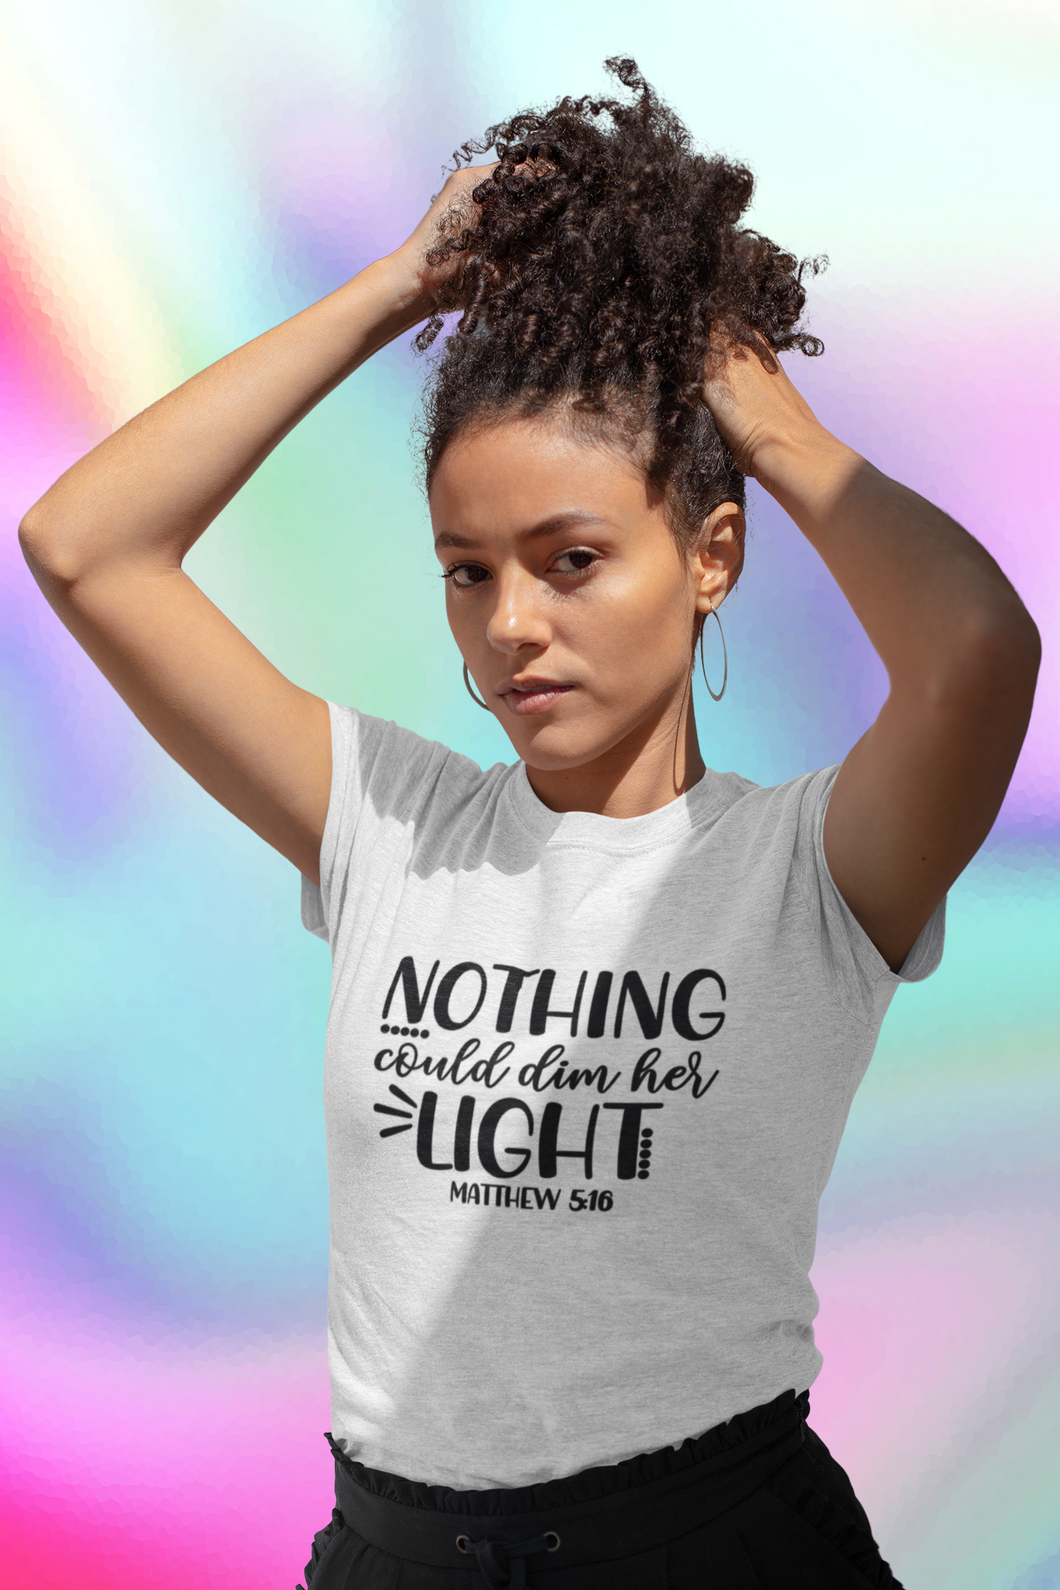 “Nothing Should Dim Her Light” Matthew 5:16 T-Shirt (Adult Sizes)